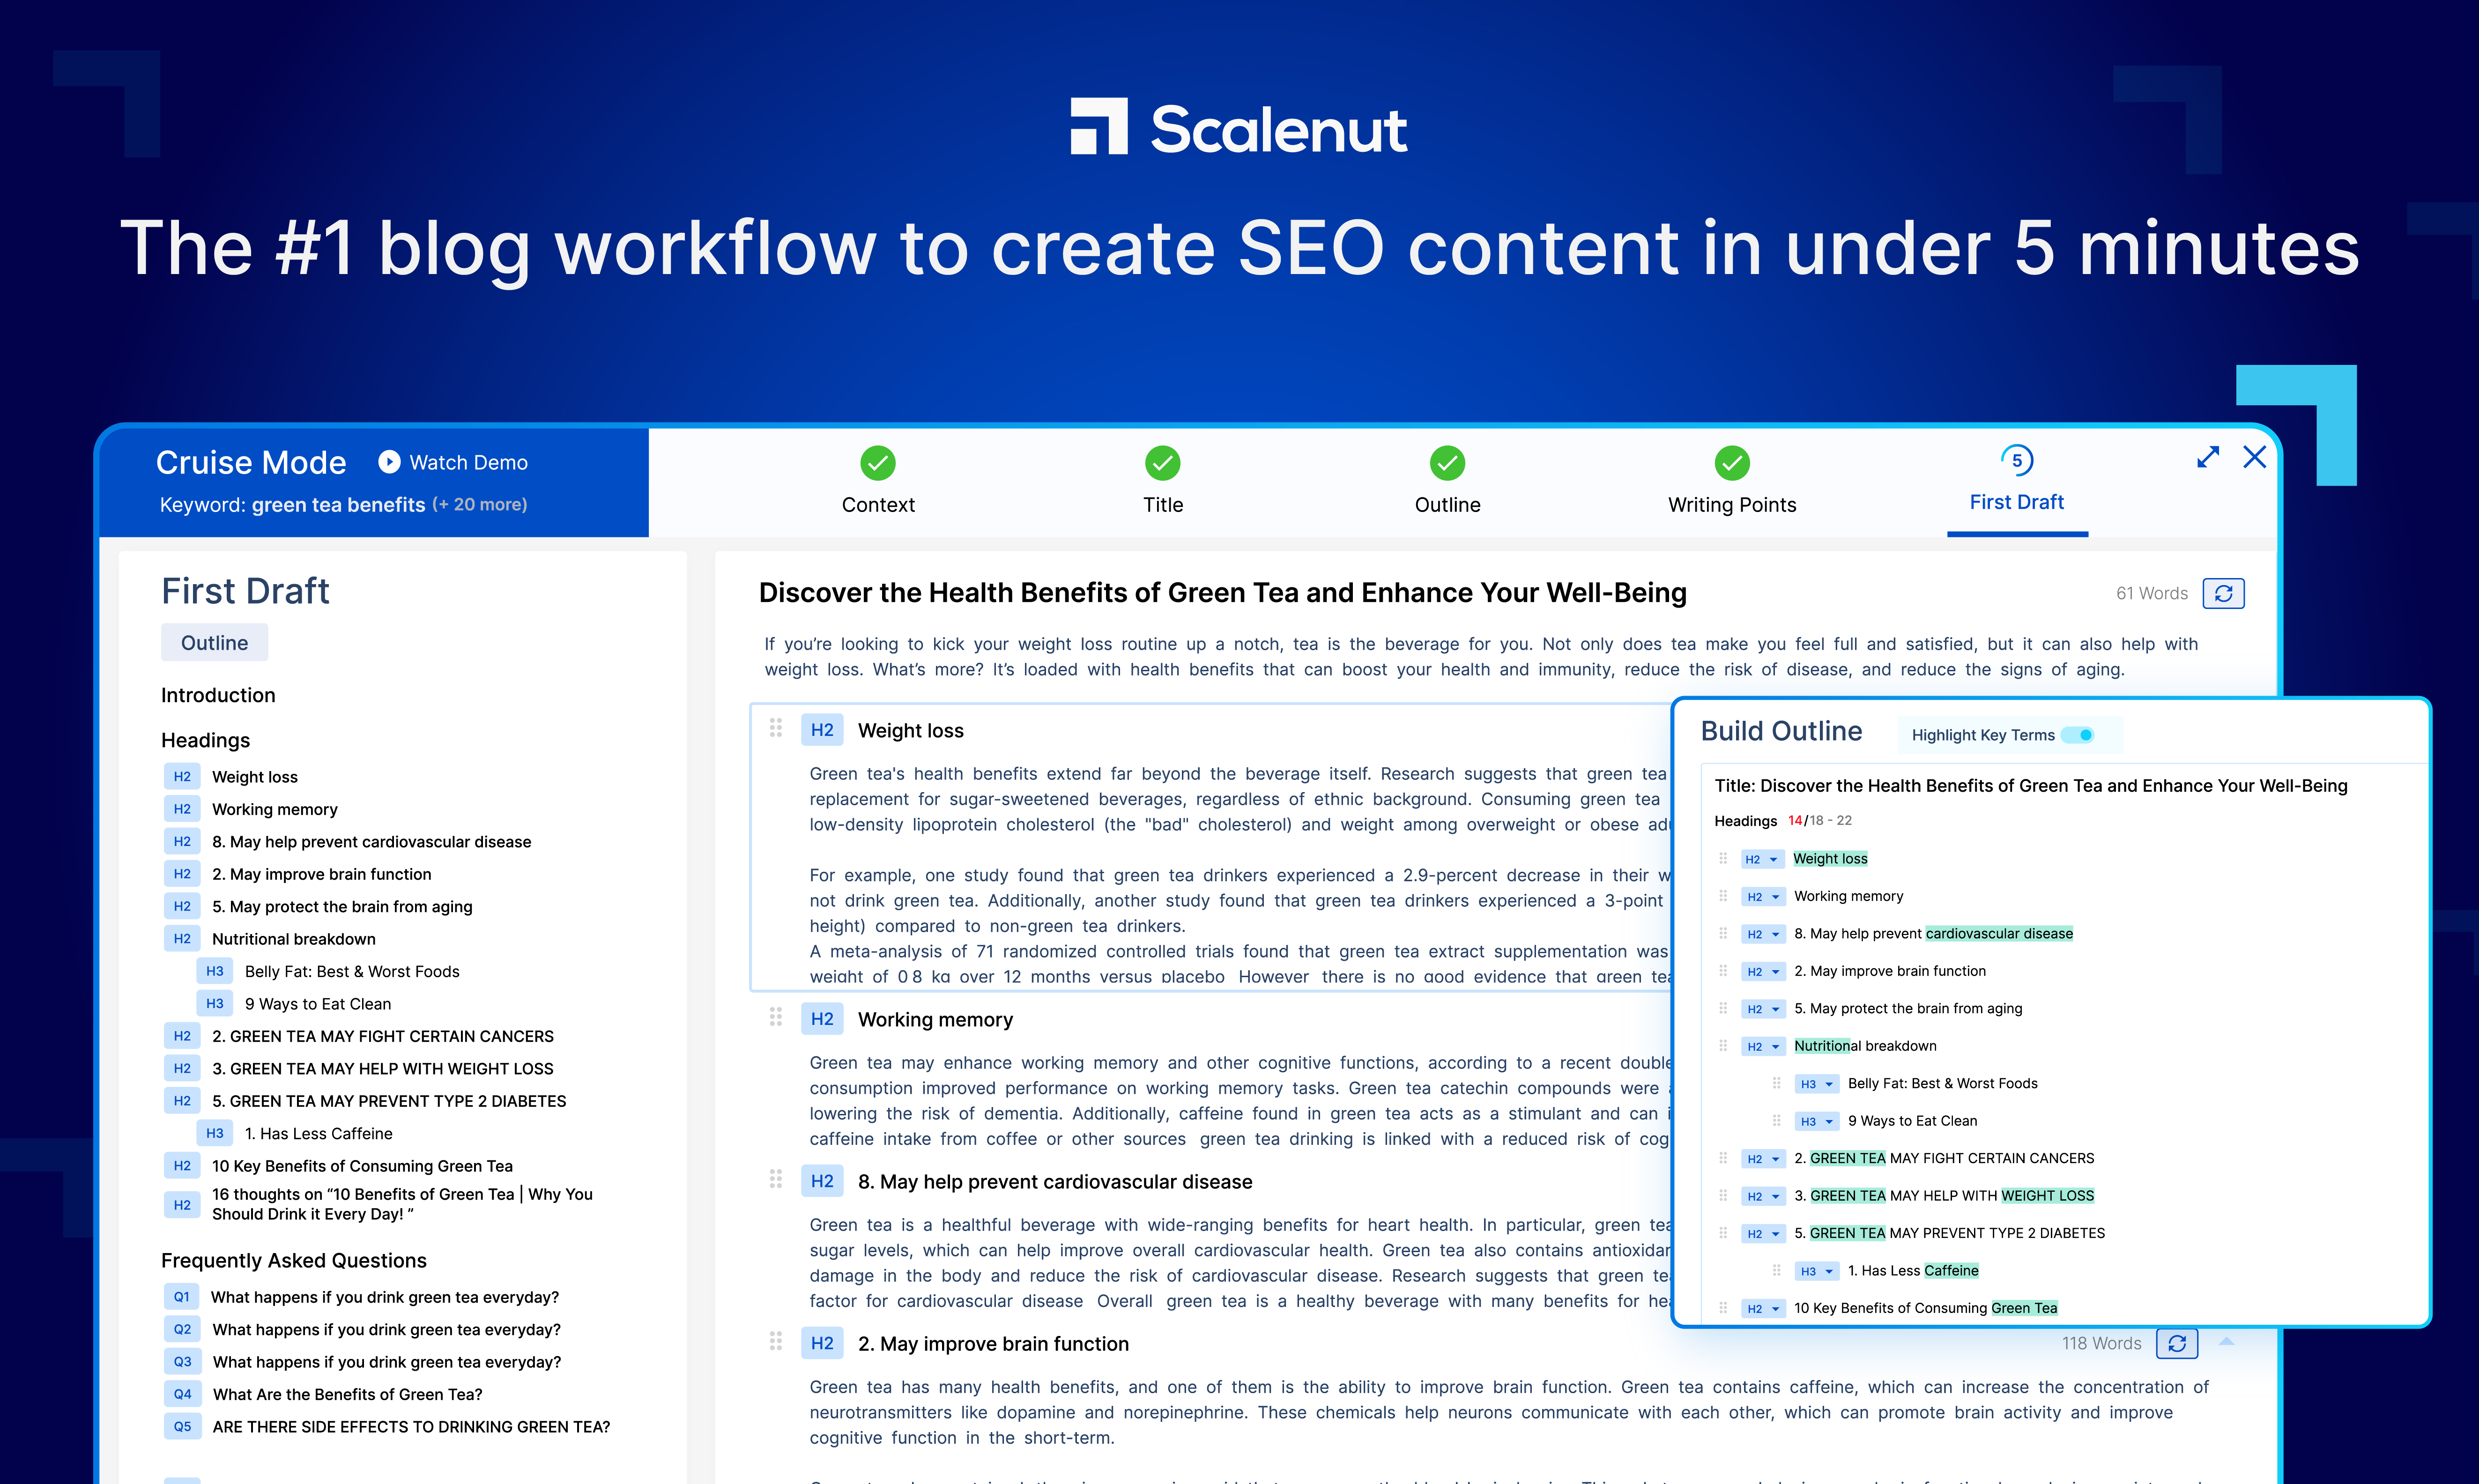 The #1 blog workflow to create SEO content in under 5 minutes